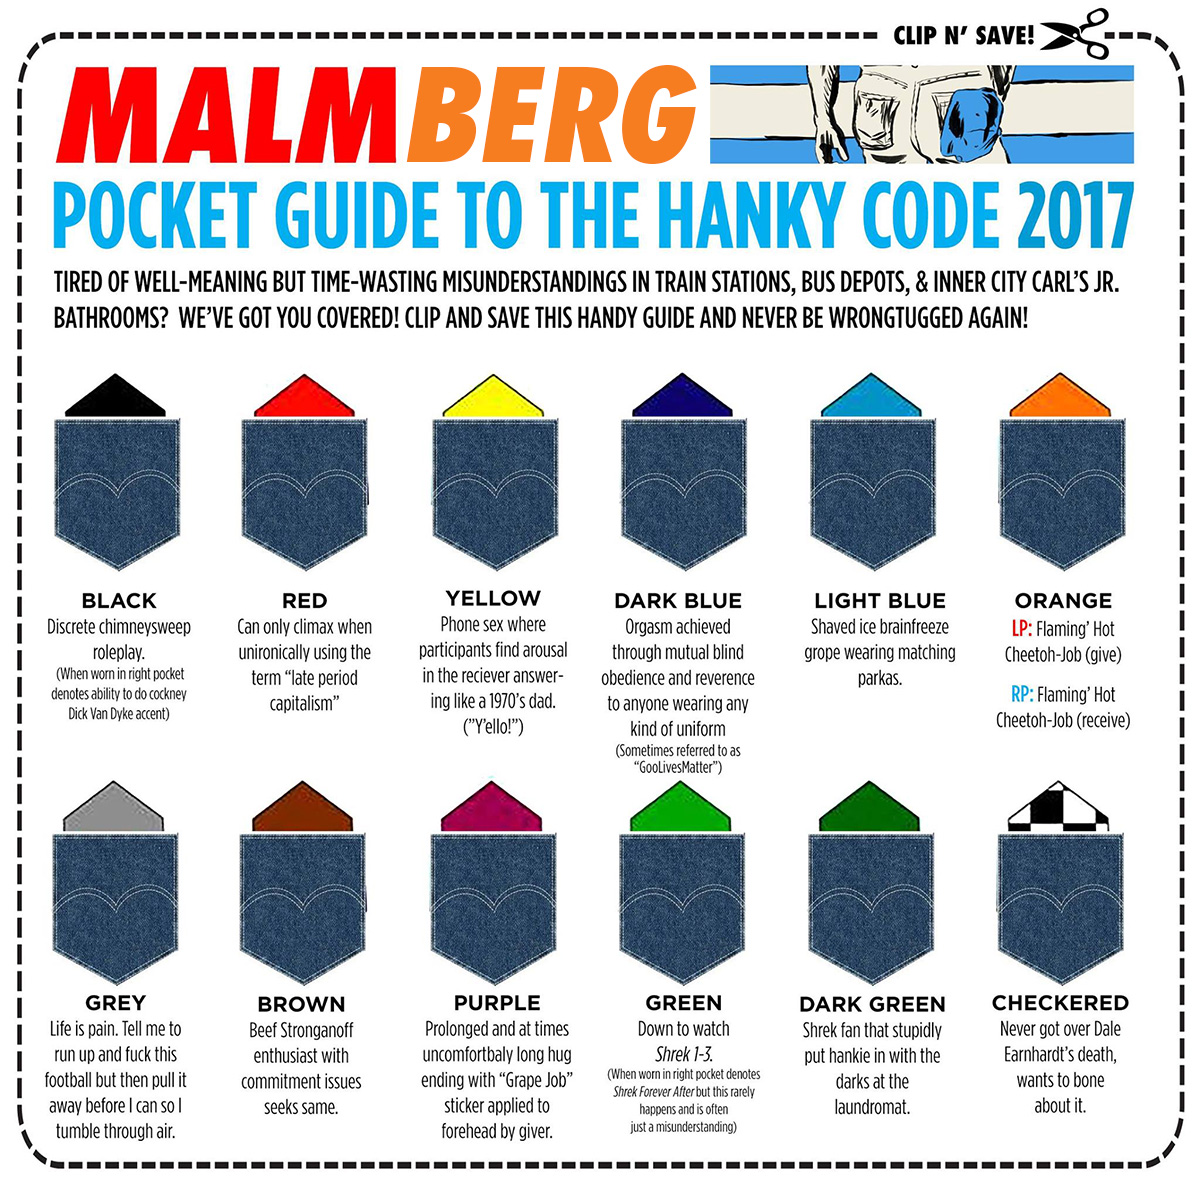 Fortunately for you, I am now publishing a brand new updated-for-2017 hanky ...